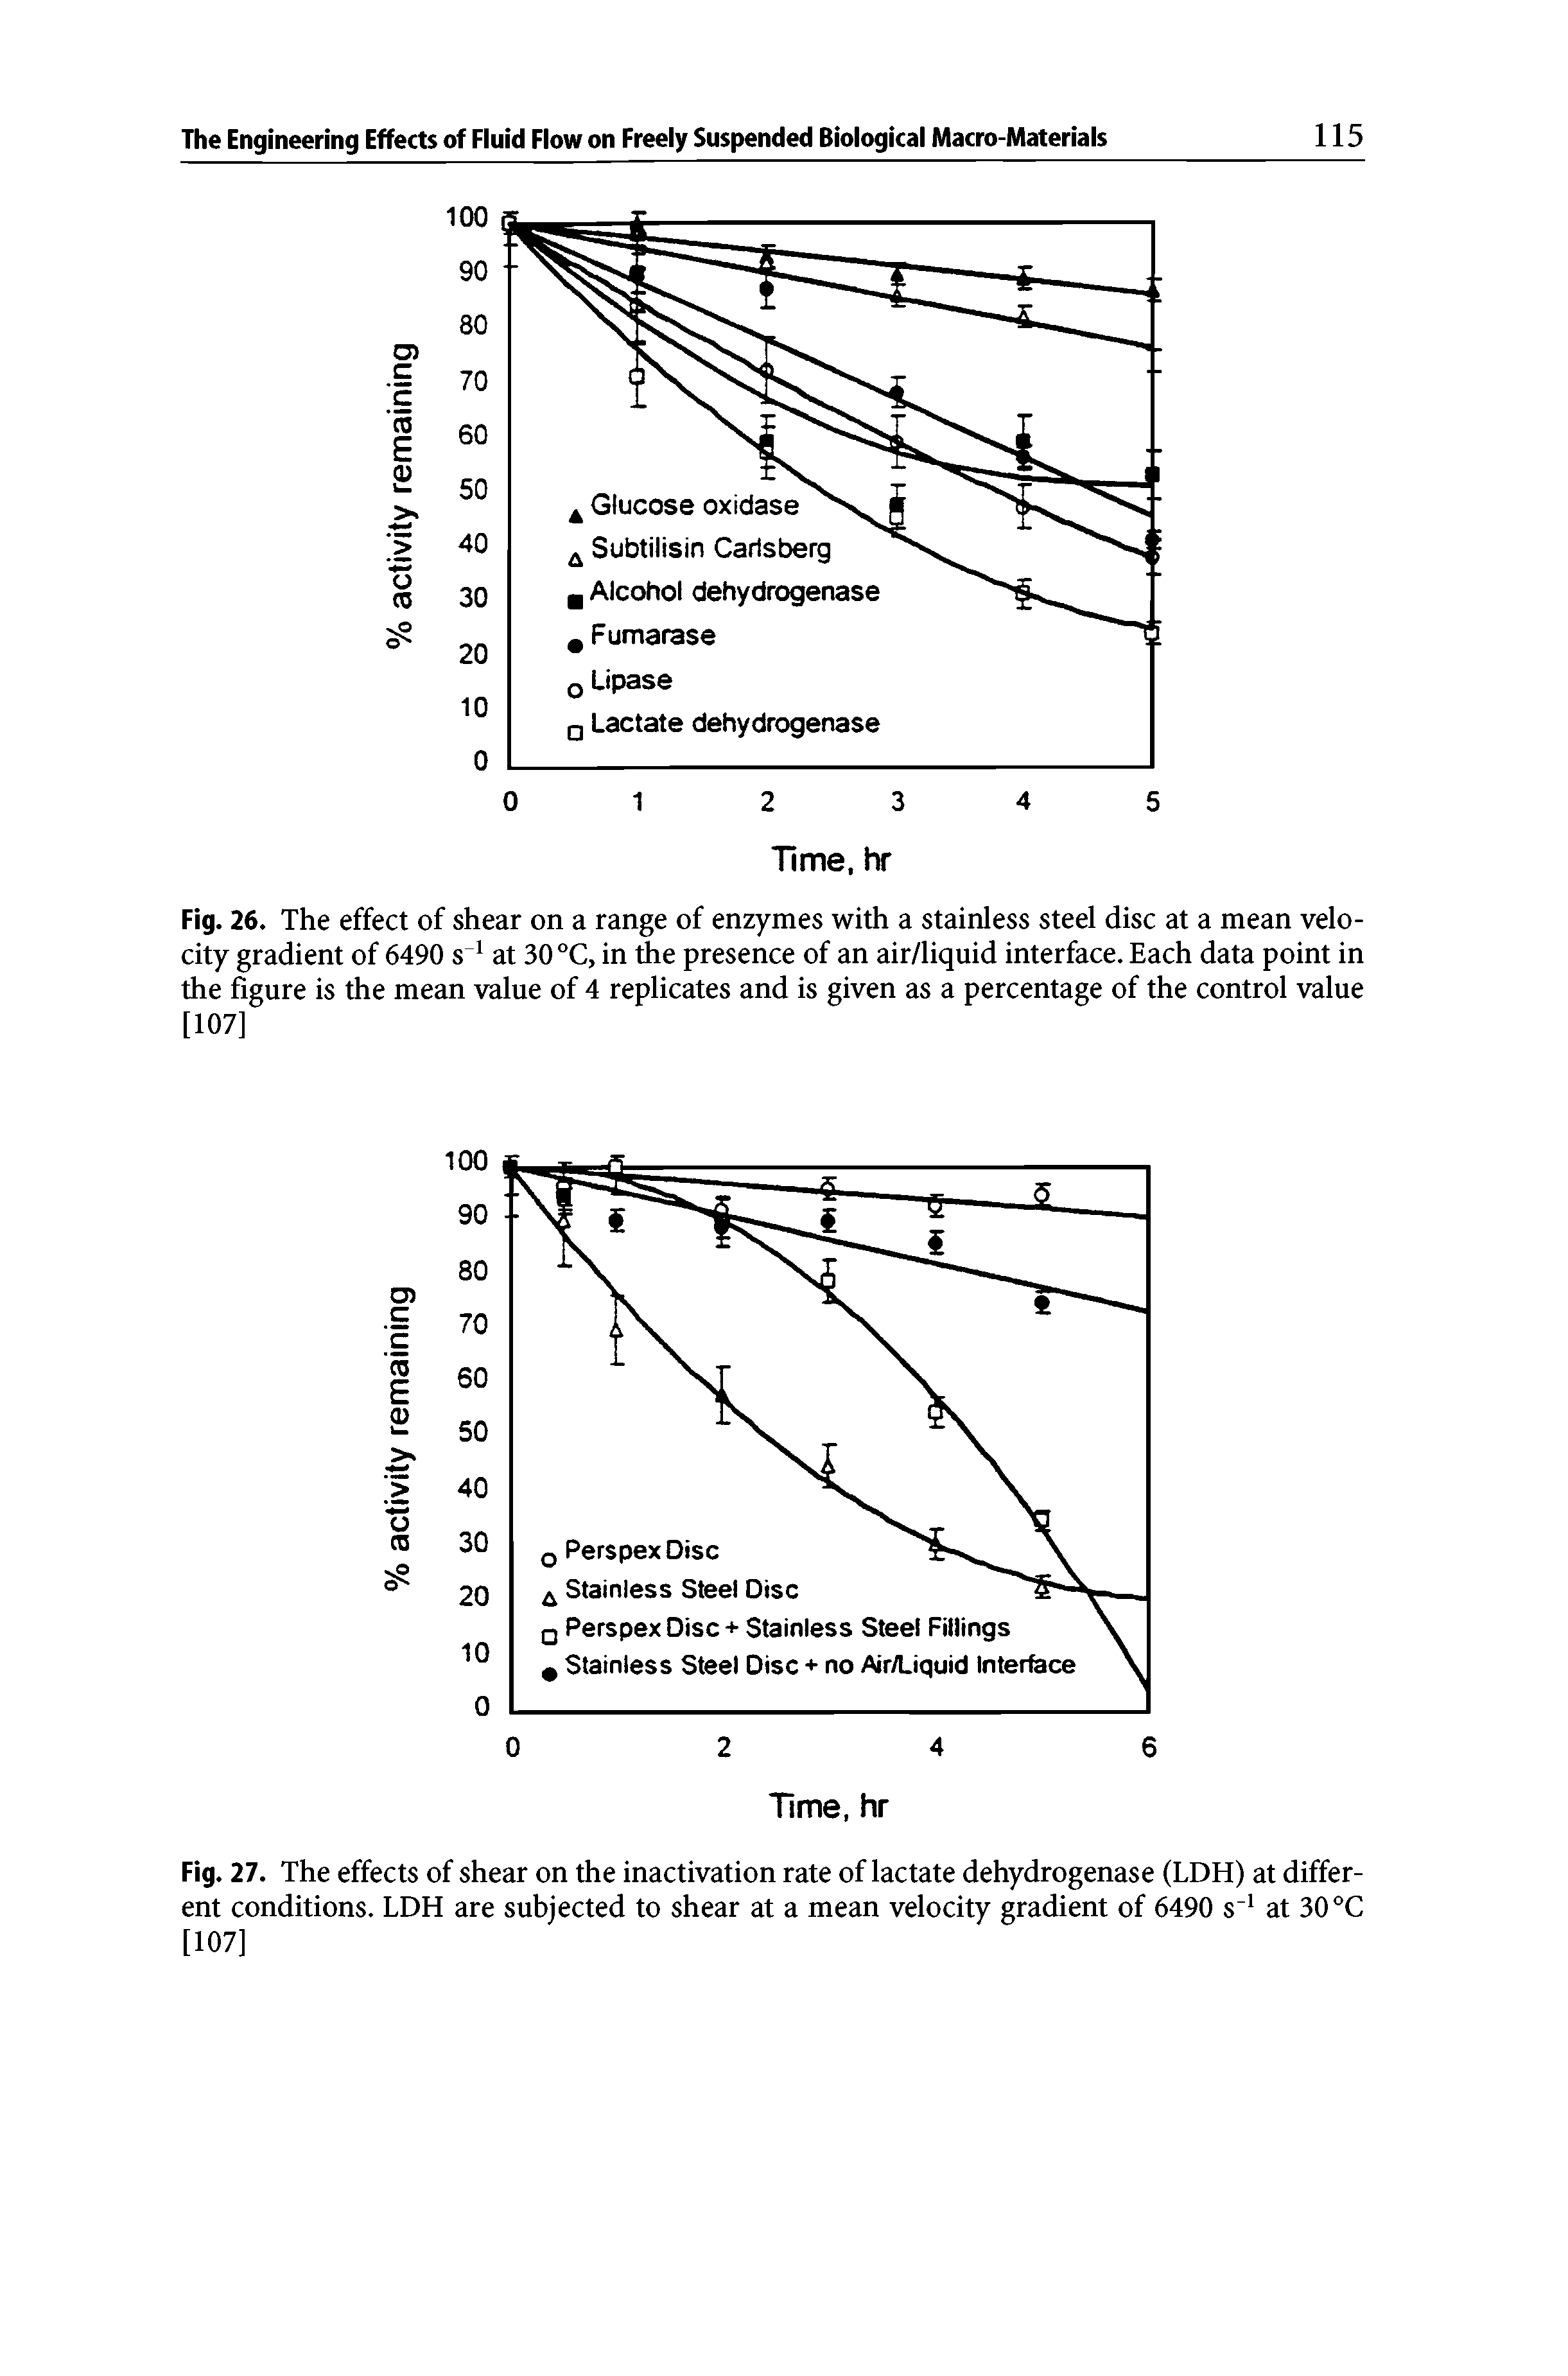 Fig. 27. The effects of shear on the inactivation rate of lactate dehydrogenase (LDH) at different conditions. LDH are subjected to shear at a mean velocity gradient of 6490 s at 30 °C [107]...